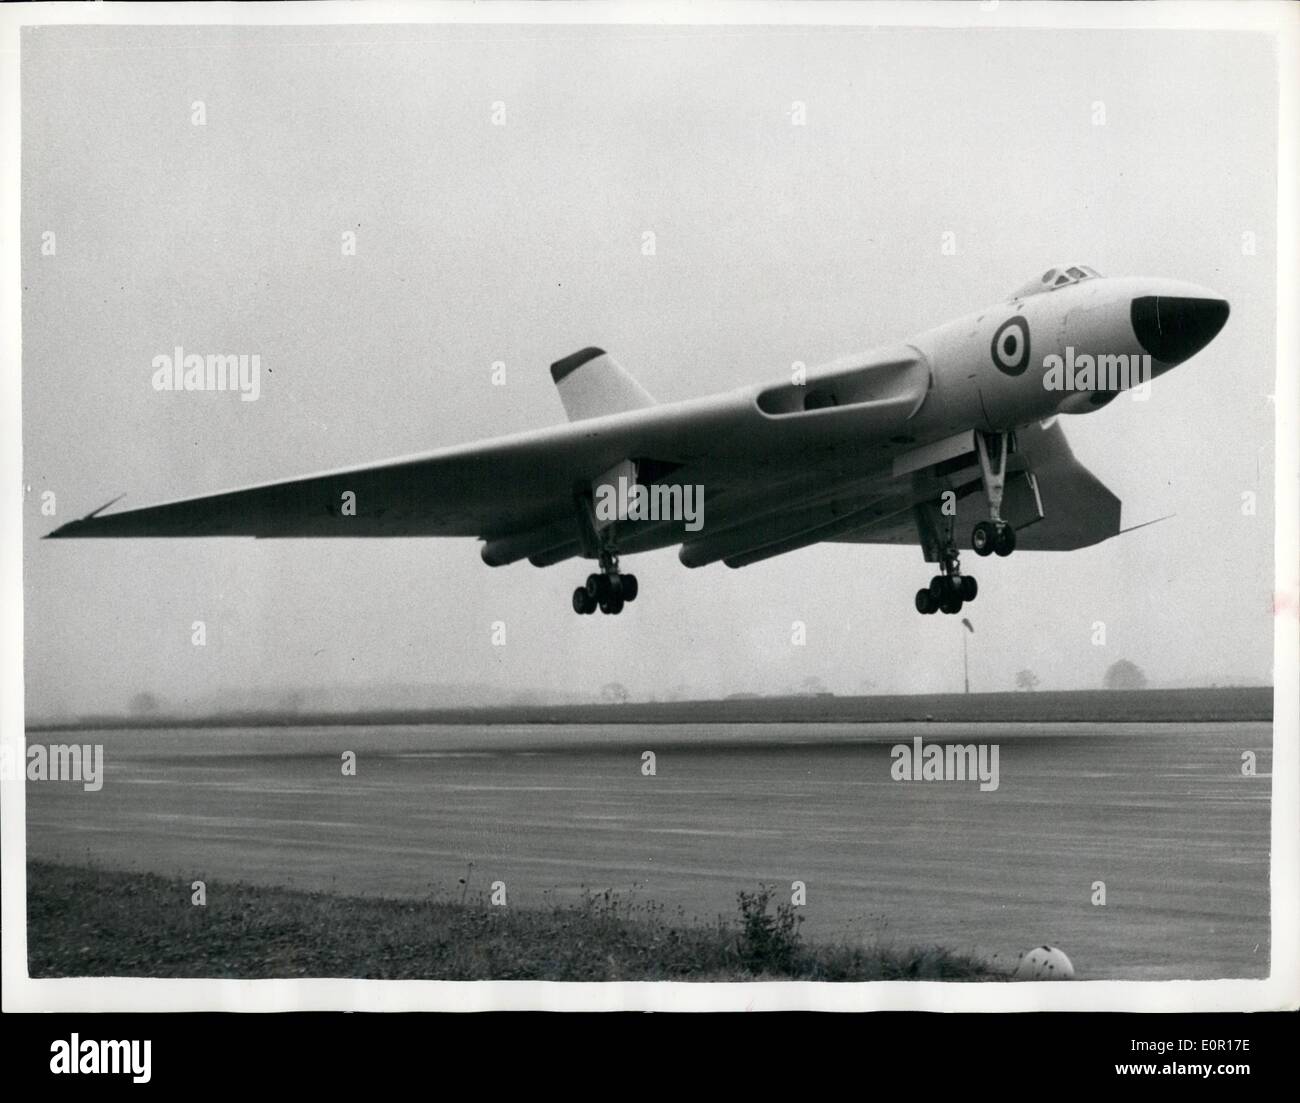 Sep. 09, 1957 - Avro - Vulcan bomber squadron of the RAF. in tarining. worlds largest delta aircraft. Men of no. 83 squadron R.A.F. are being trained at R.A. F. wadding ton on the largest delta aircraft in the world - the Avro Vulcan - the medium range bomber known as the ''Flying triangle'' It is the first delta to have found jet engines - in this case the Bristol Olympus two spool turbo - jet. the aircraft carriers a crew of five -two pilots two navagatroes and an air electronics officer .The Vulcan has a wing span f 99 ft. and length of 97 ft Stock Photo